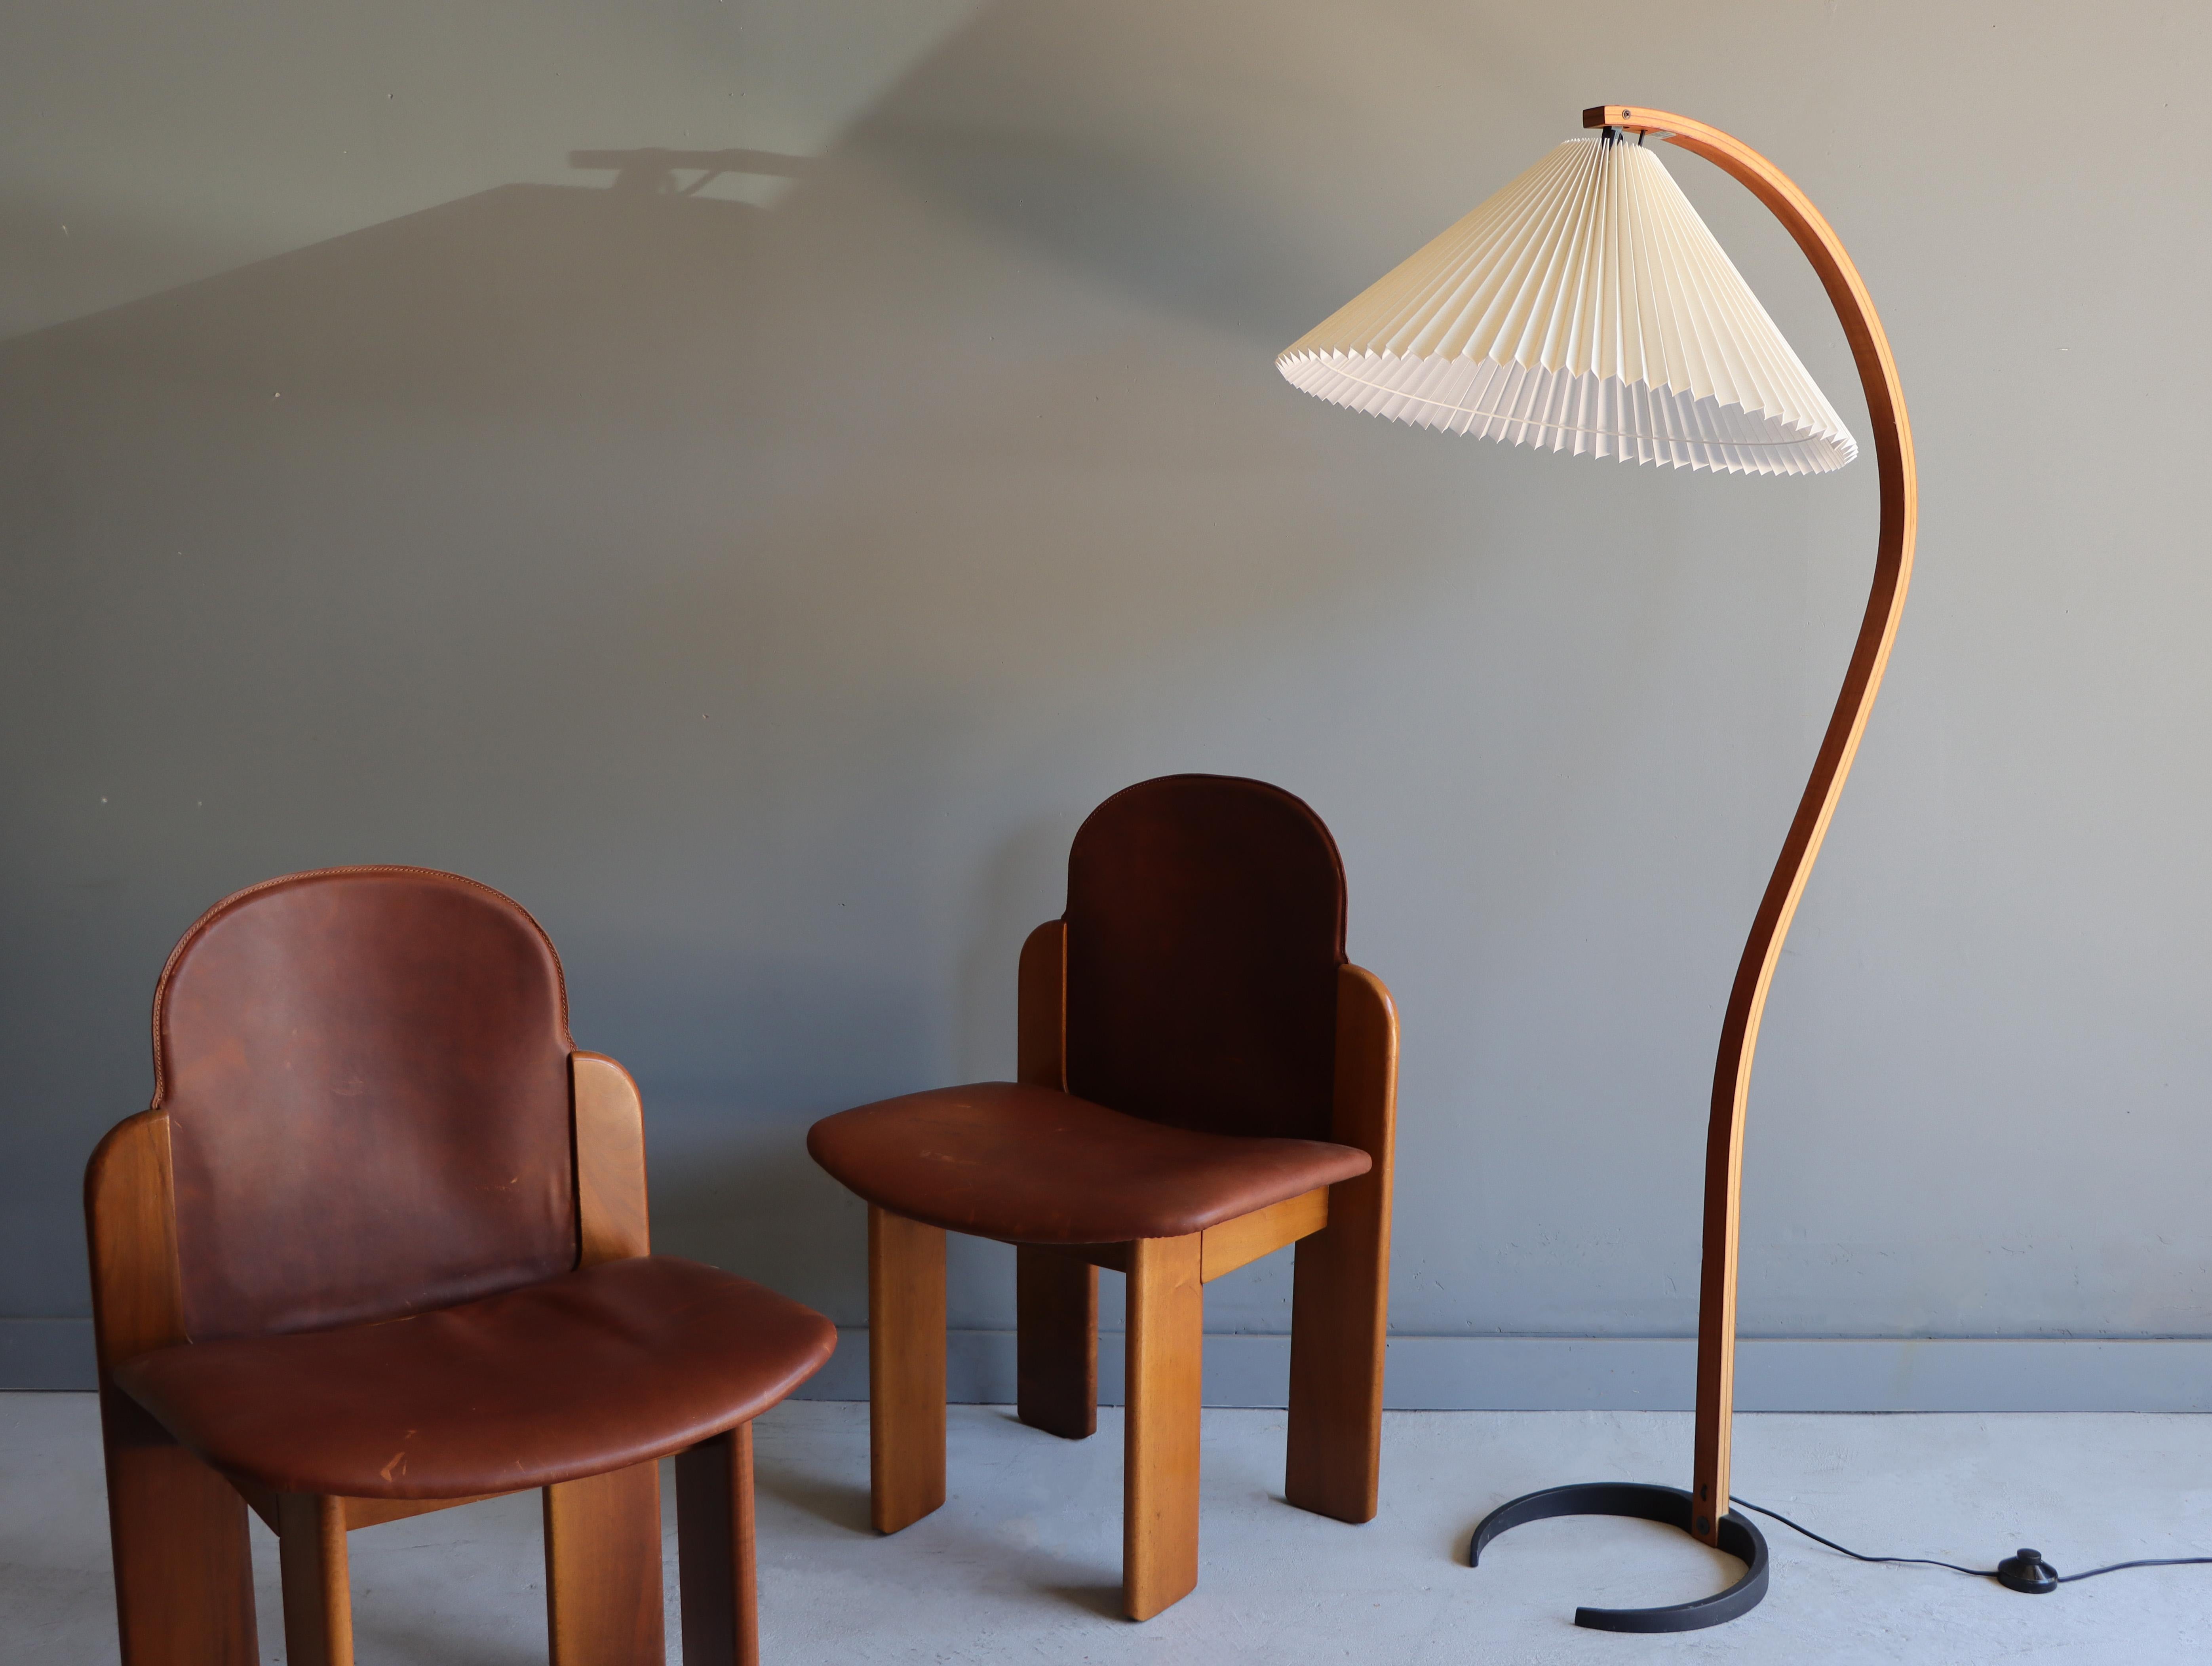 Early sculptural teak and beech floor lamp designed by Mads Caprani Denmark, circa 1970s. Iconic organic bentwood design complimented by its soft lighted pleated shade and crescent iron base. This design looks good from every angle. 

Features a